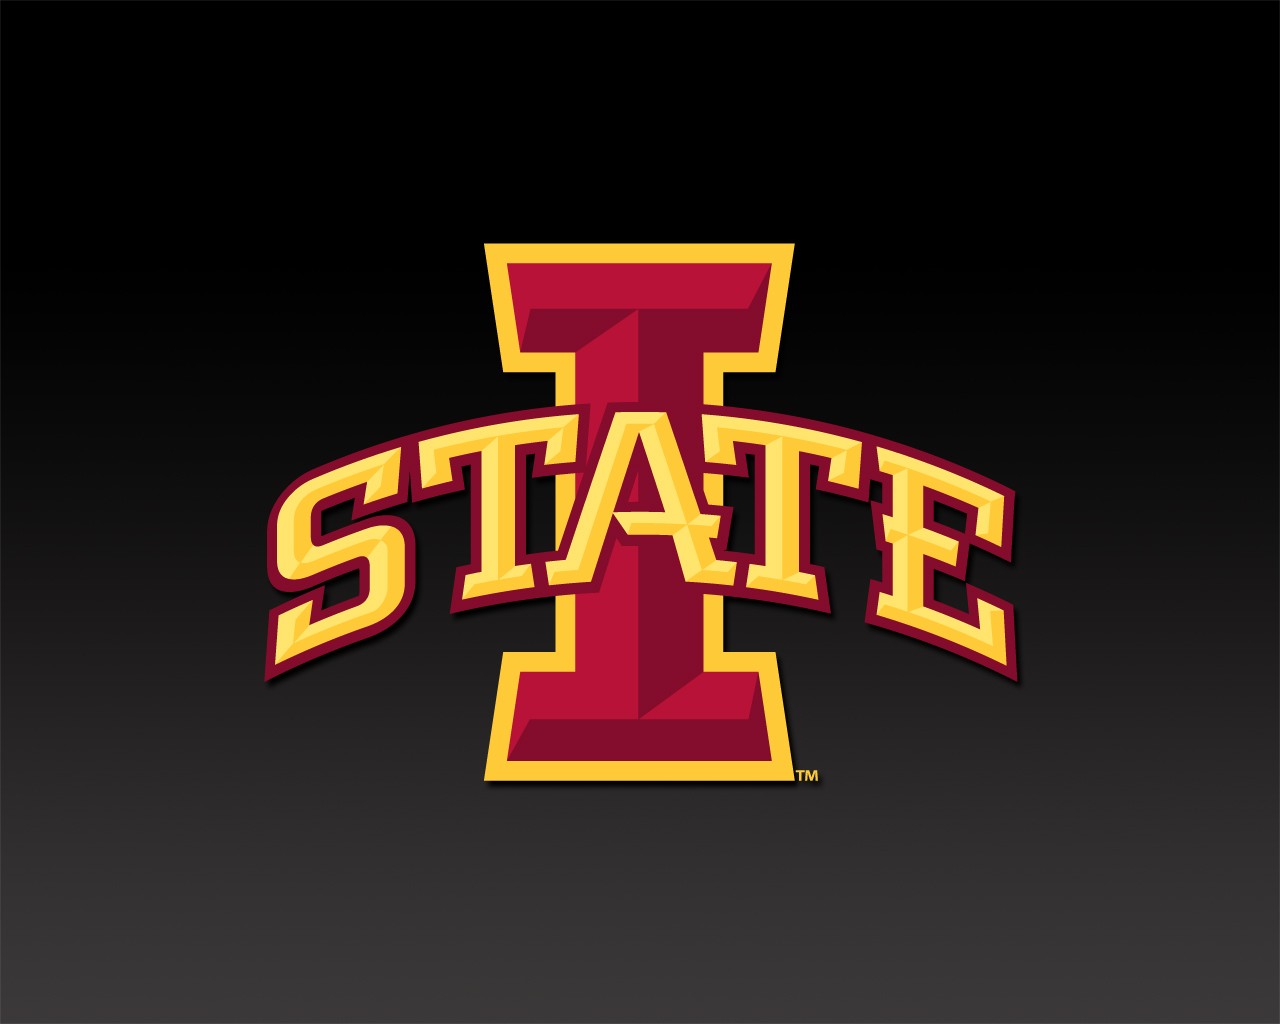 Archived Wallpaper   Iowa State University Athletics Official Web Site